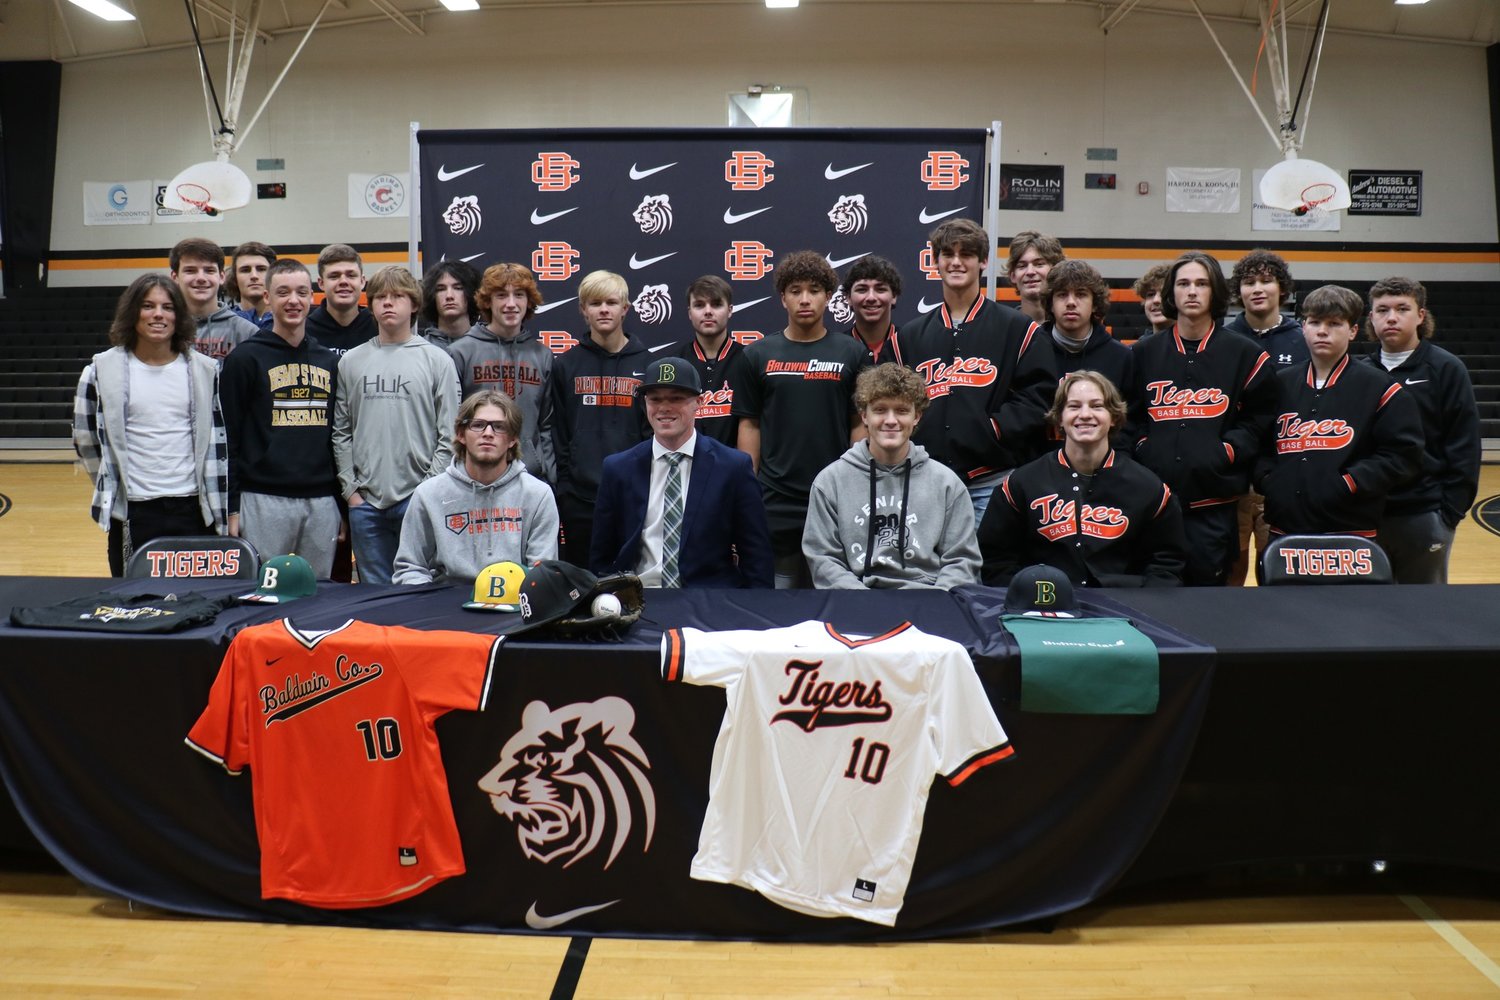 Teammates and classmates surround Trevor Murphy for a picture after the Nov. 17 signing ceremony at Baldwin County High School. Murphy inked the commitment he made to Bishop State baseball Oct. 13.